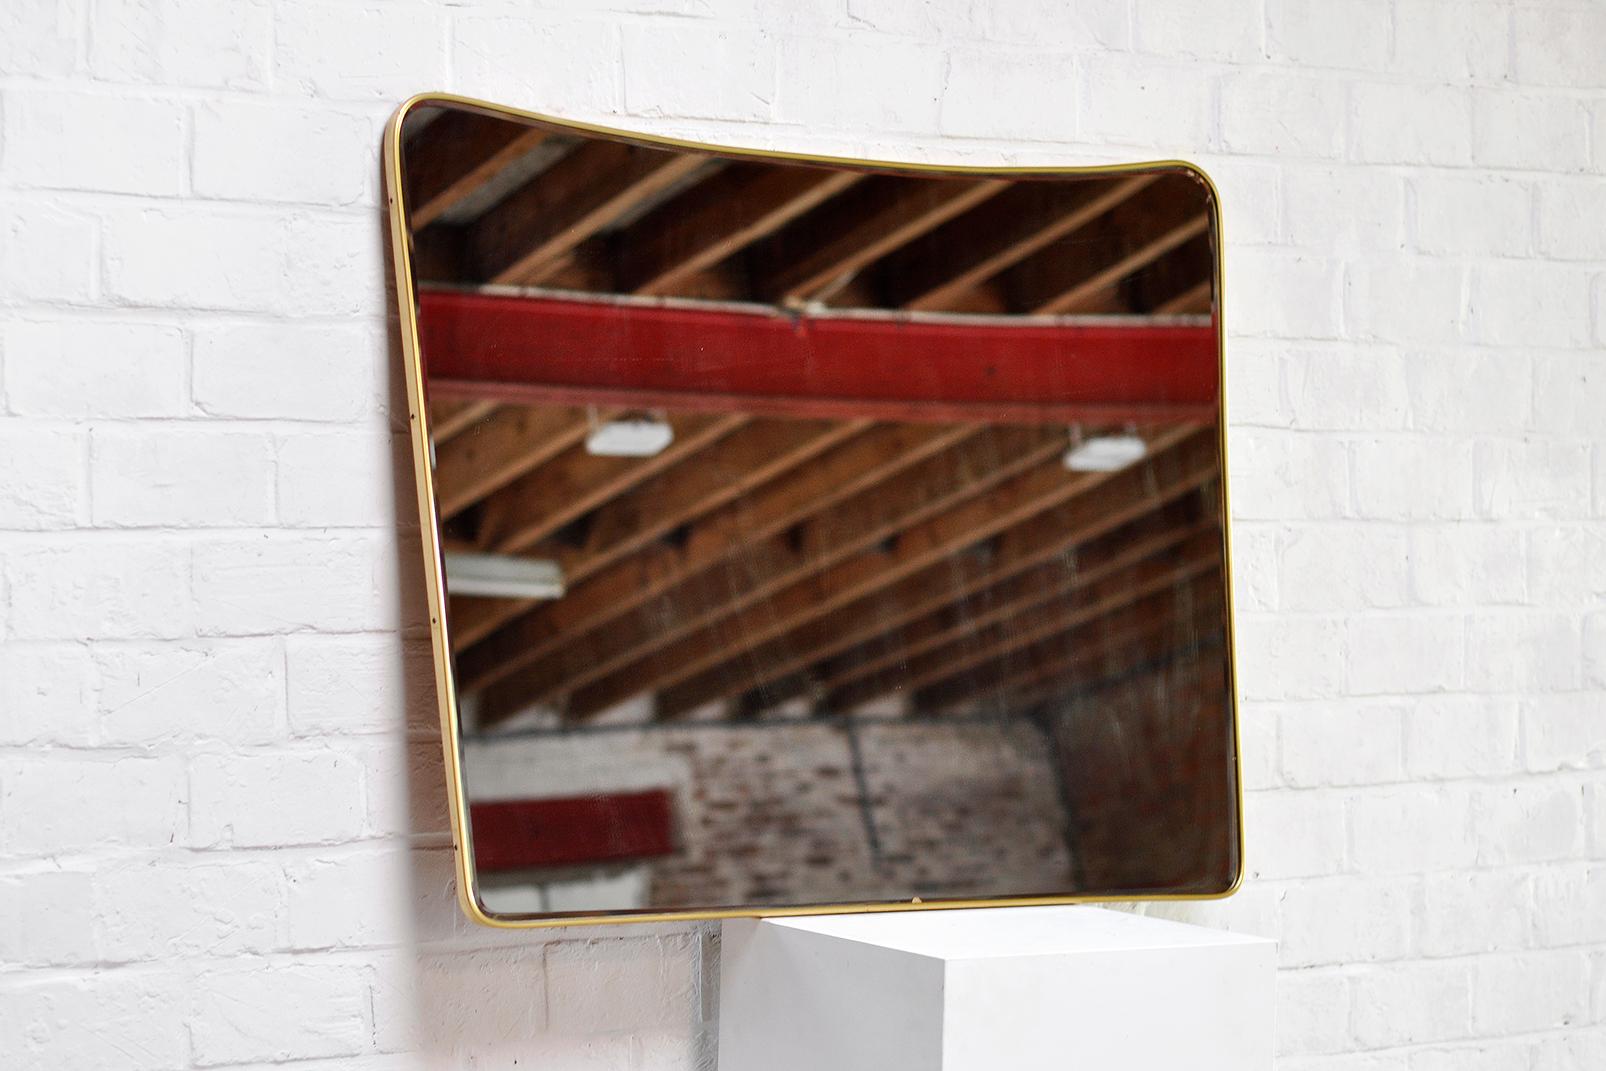 A large vintage brass Framed mirror in the style of Gio Ponti.
Beautiful curved edges.
Italy, circa 1960.'s
2 small chips at the edge of the mirrored crystal glass. 